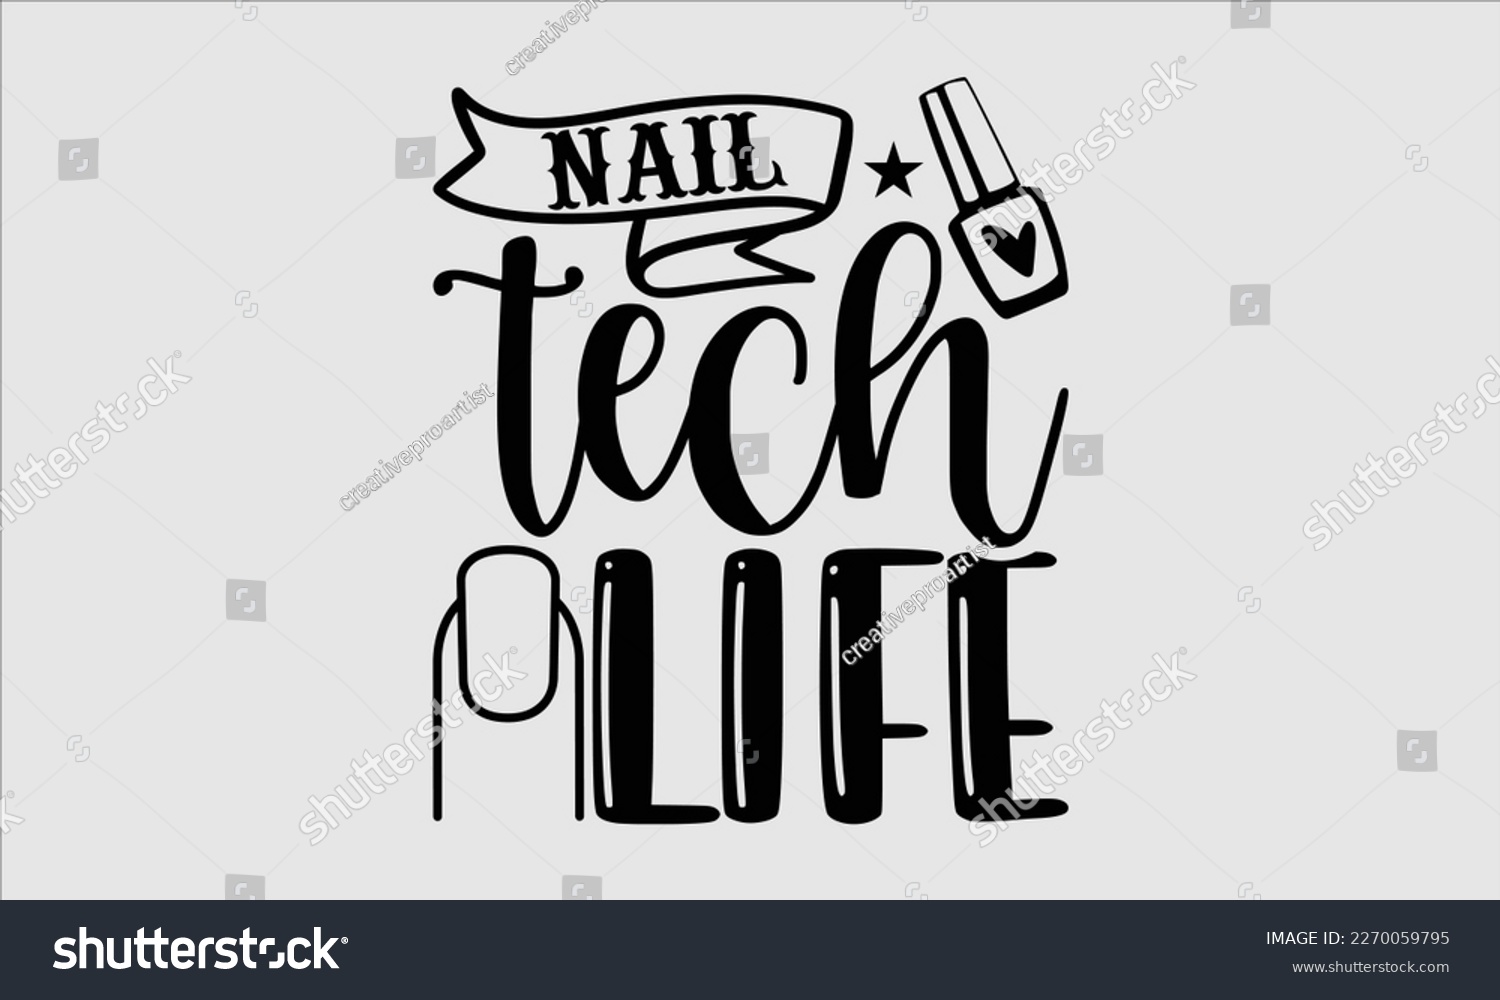 SVG of Nail tech life- Nail Tech t shirts design, Hand written lettering phrase, Isolated on white background,  Calligraphy graphic for Cutting Machine, svg eps 10. svg